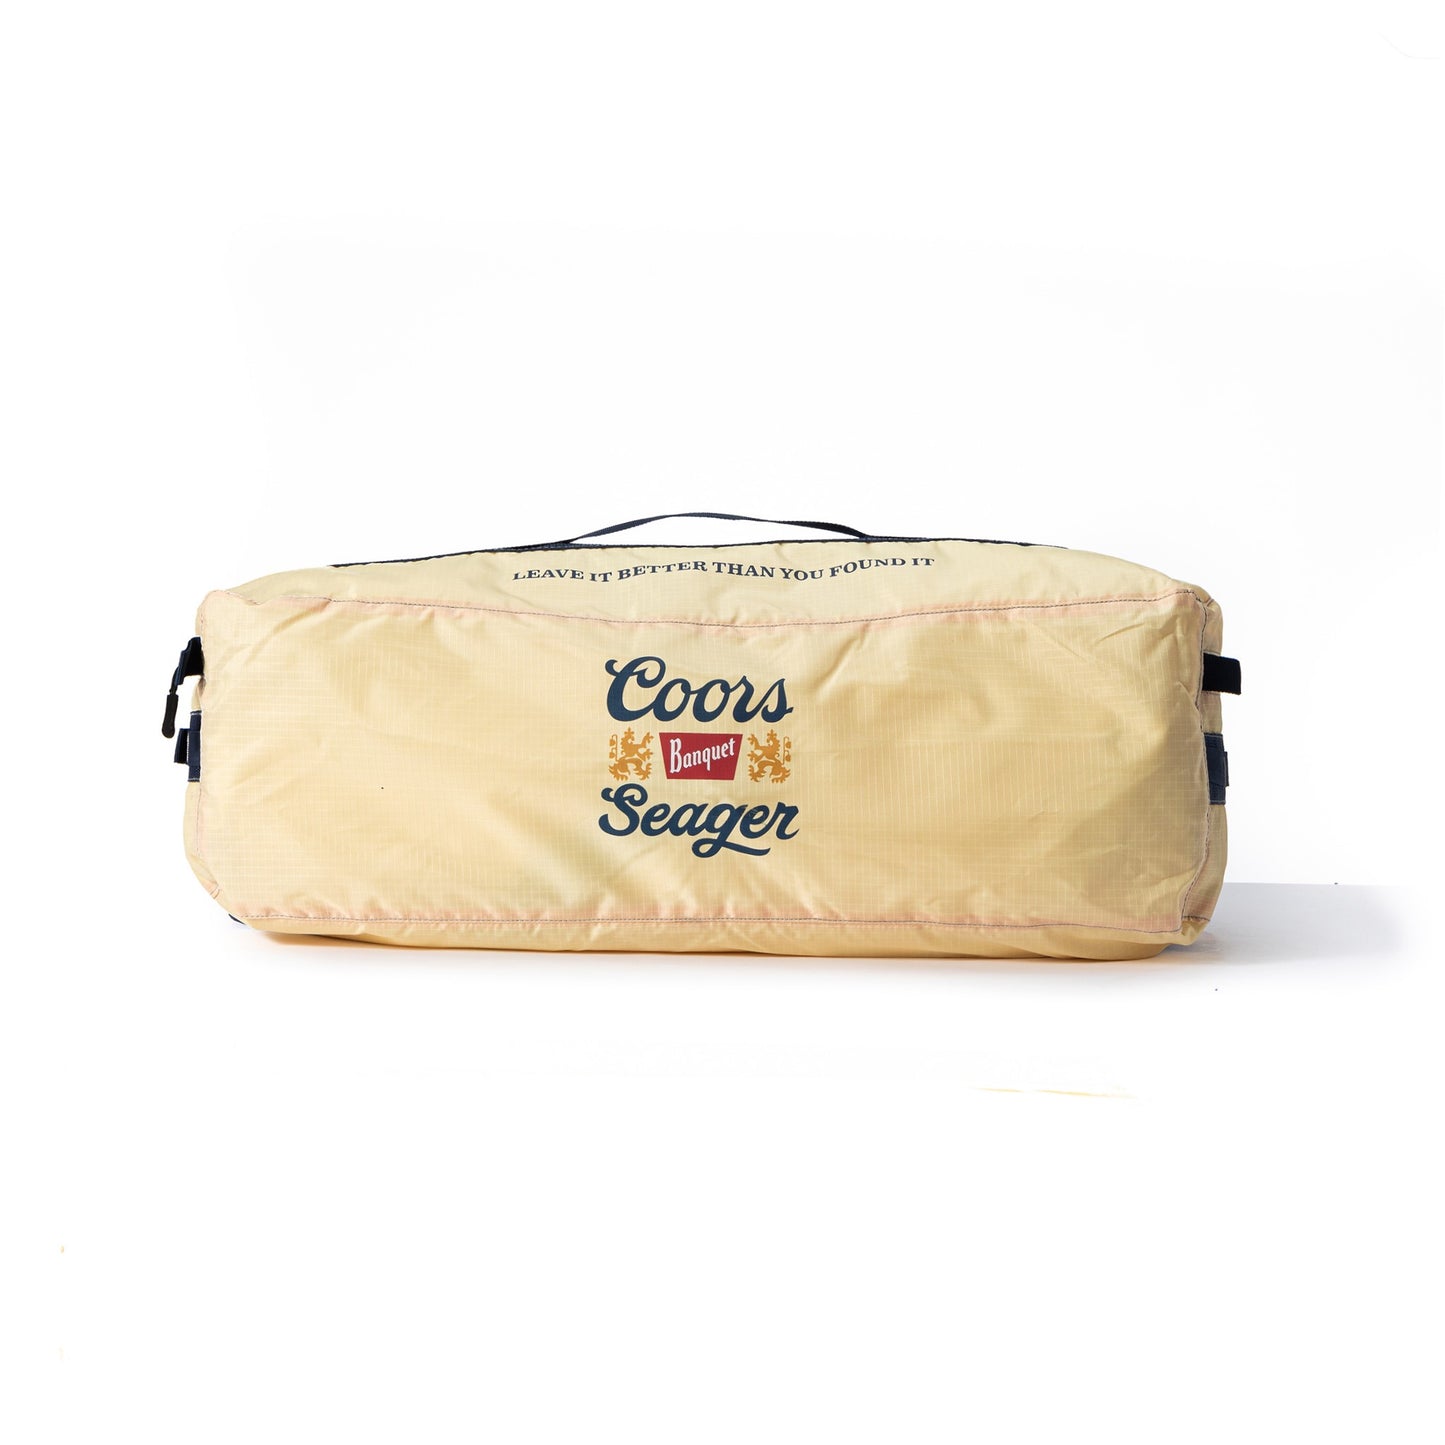 Coors x Seager Free Range Tent